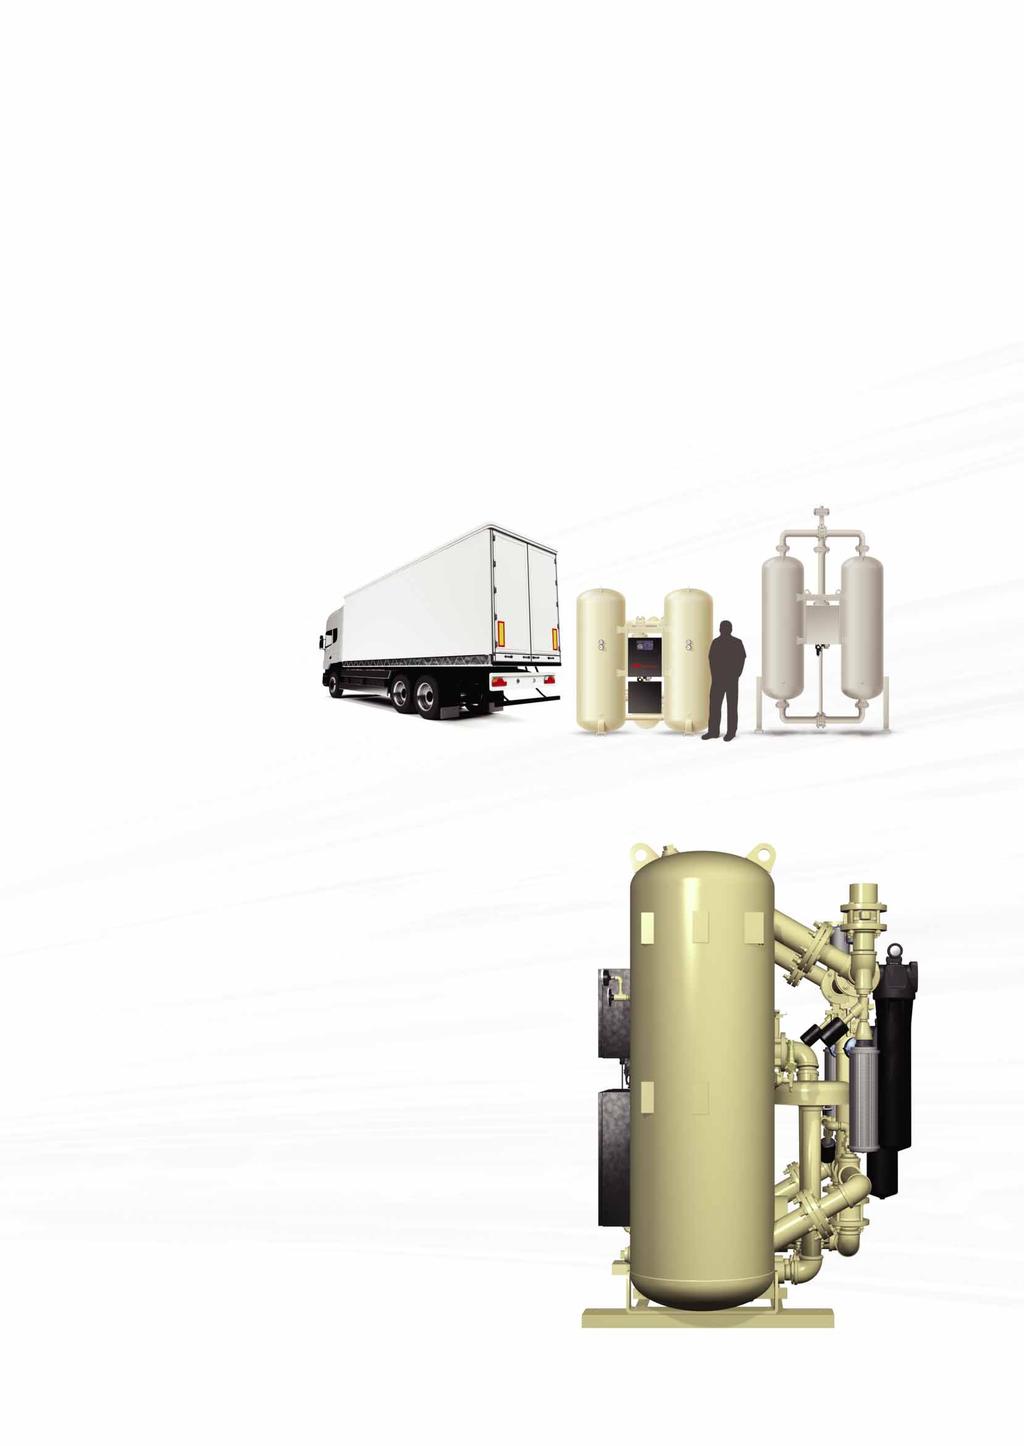 Innovative Design is Now Within Reach Ingersoll Rand Ingersoll Rand heatless and heated blower desiccant dryers are engineered for easy access, maximum efficiency and long life are delivered in a